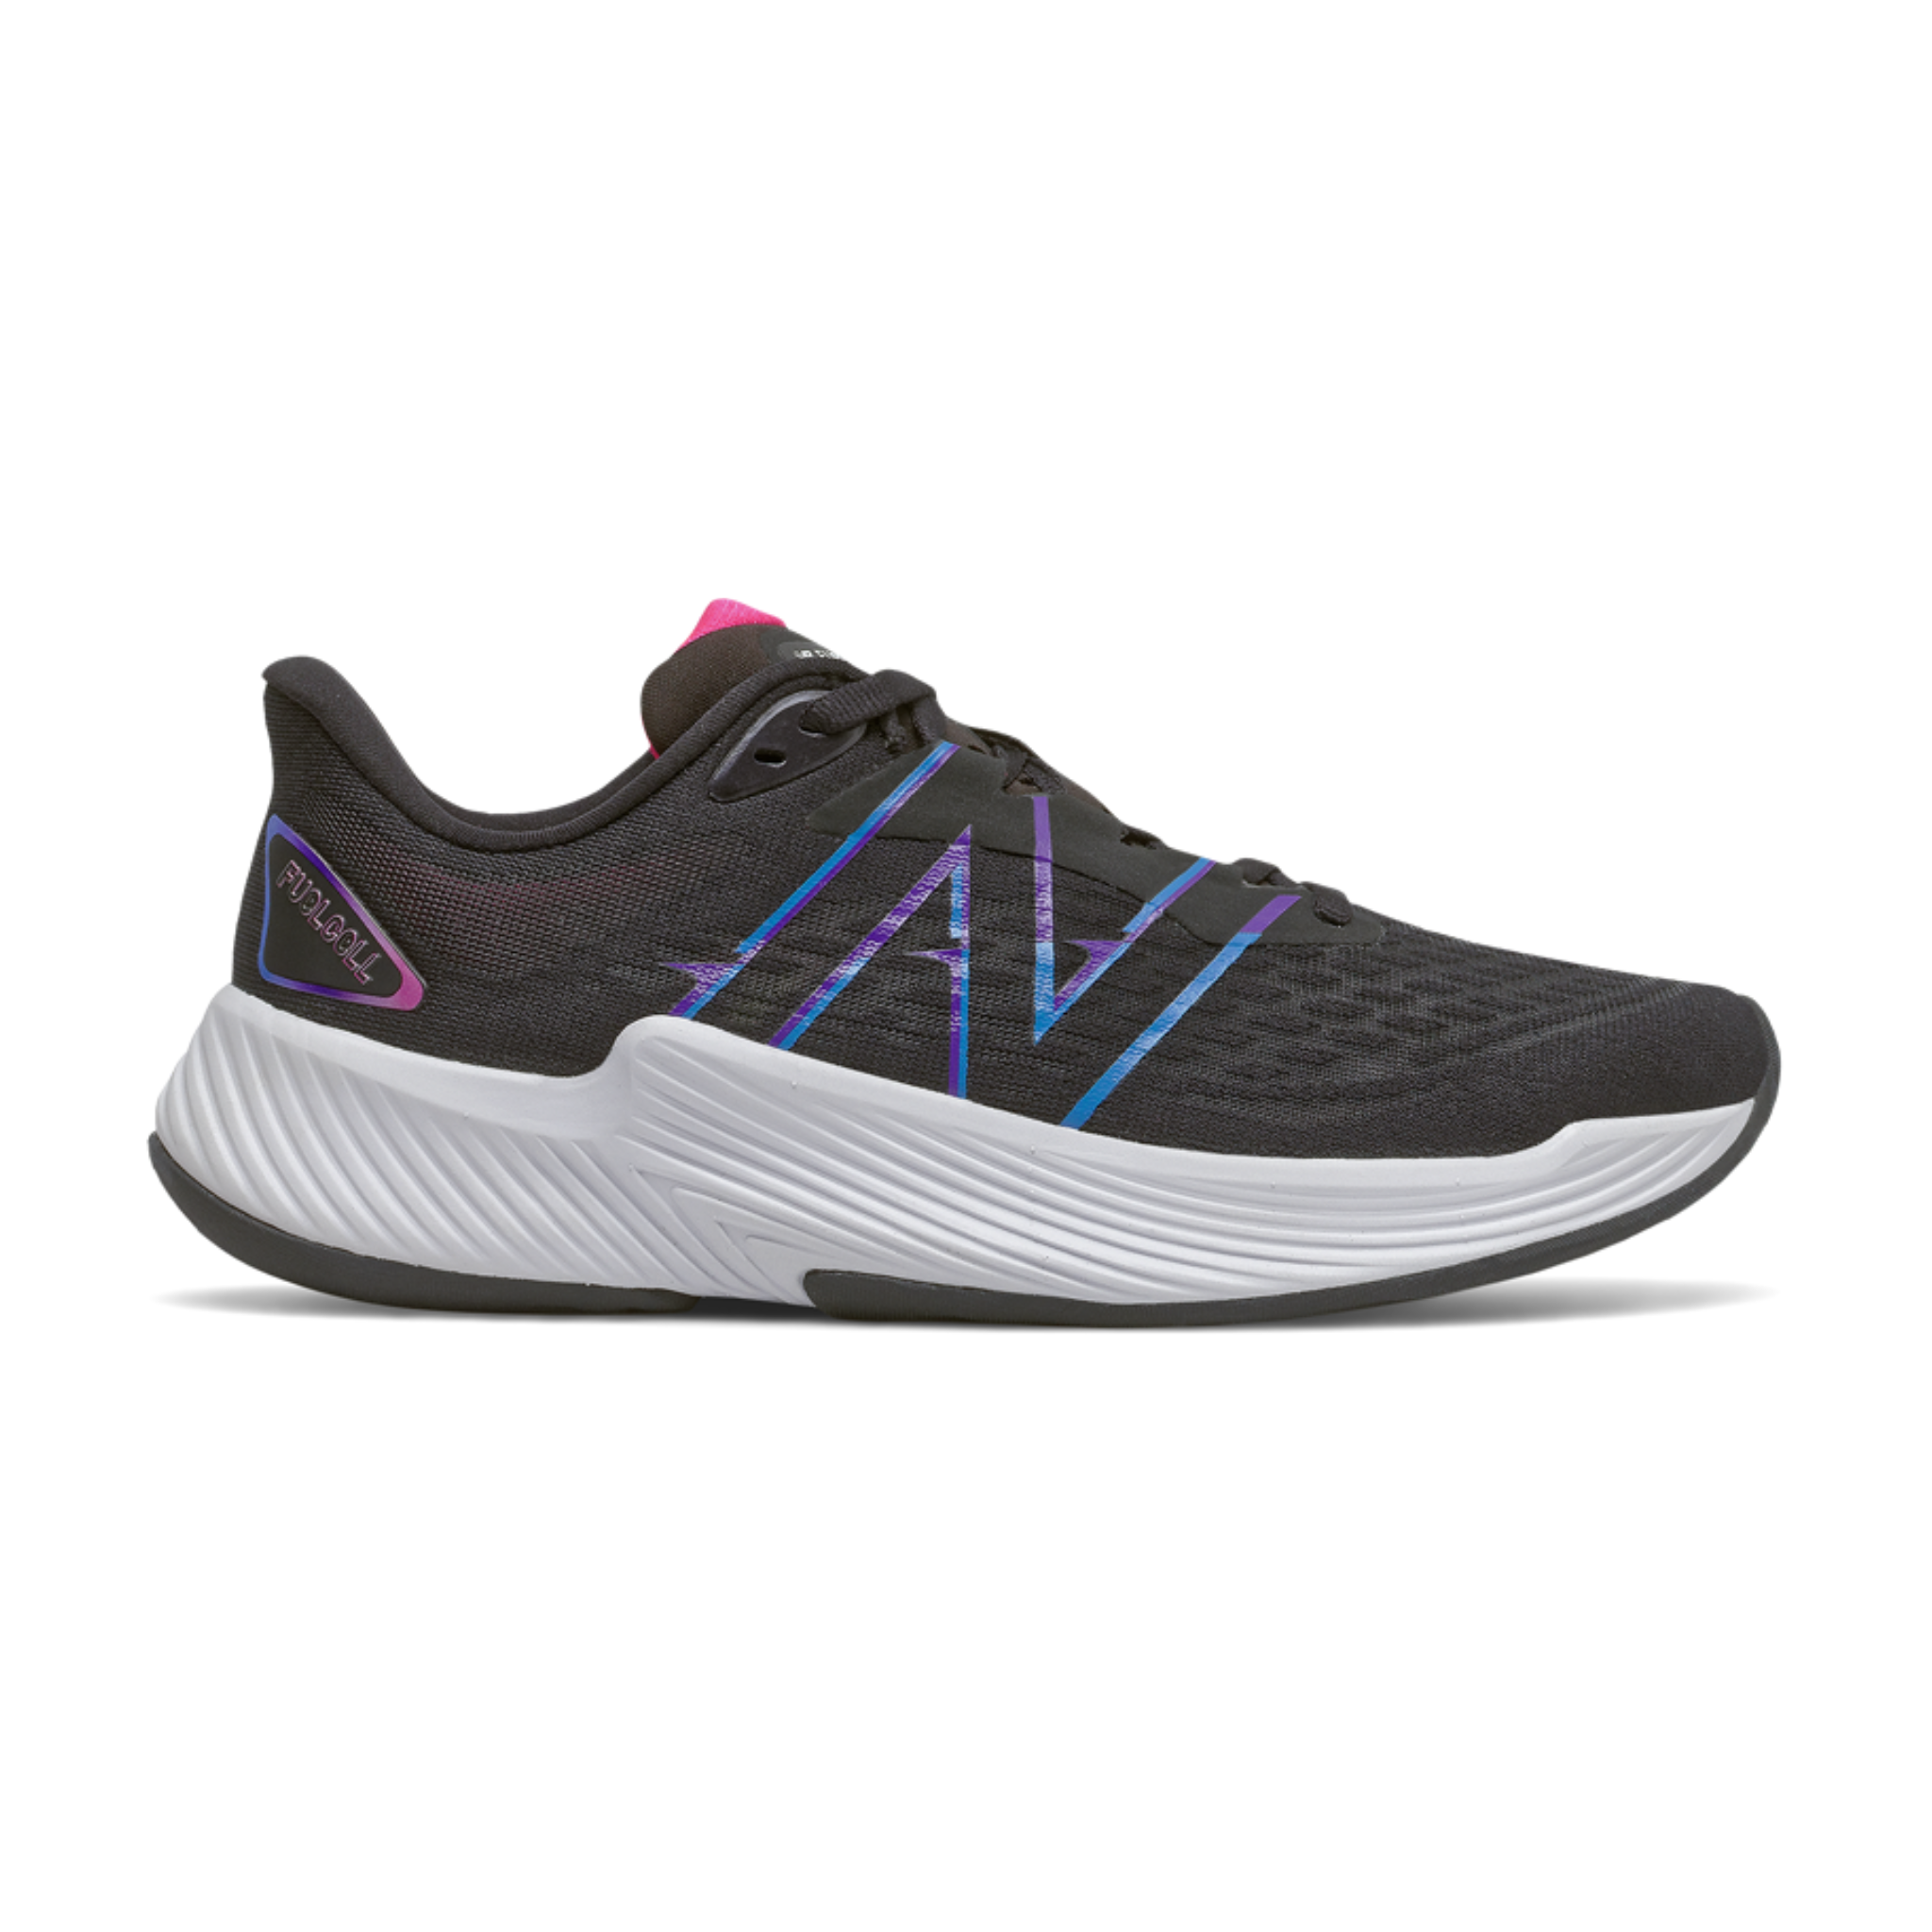 NEW BALANCE WOMEN'S FUELCELL PRISM V2 B